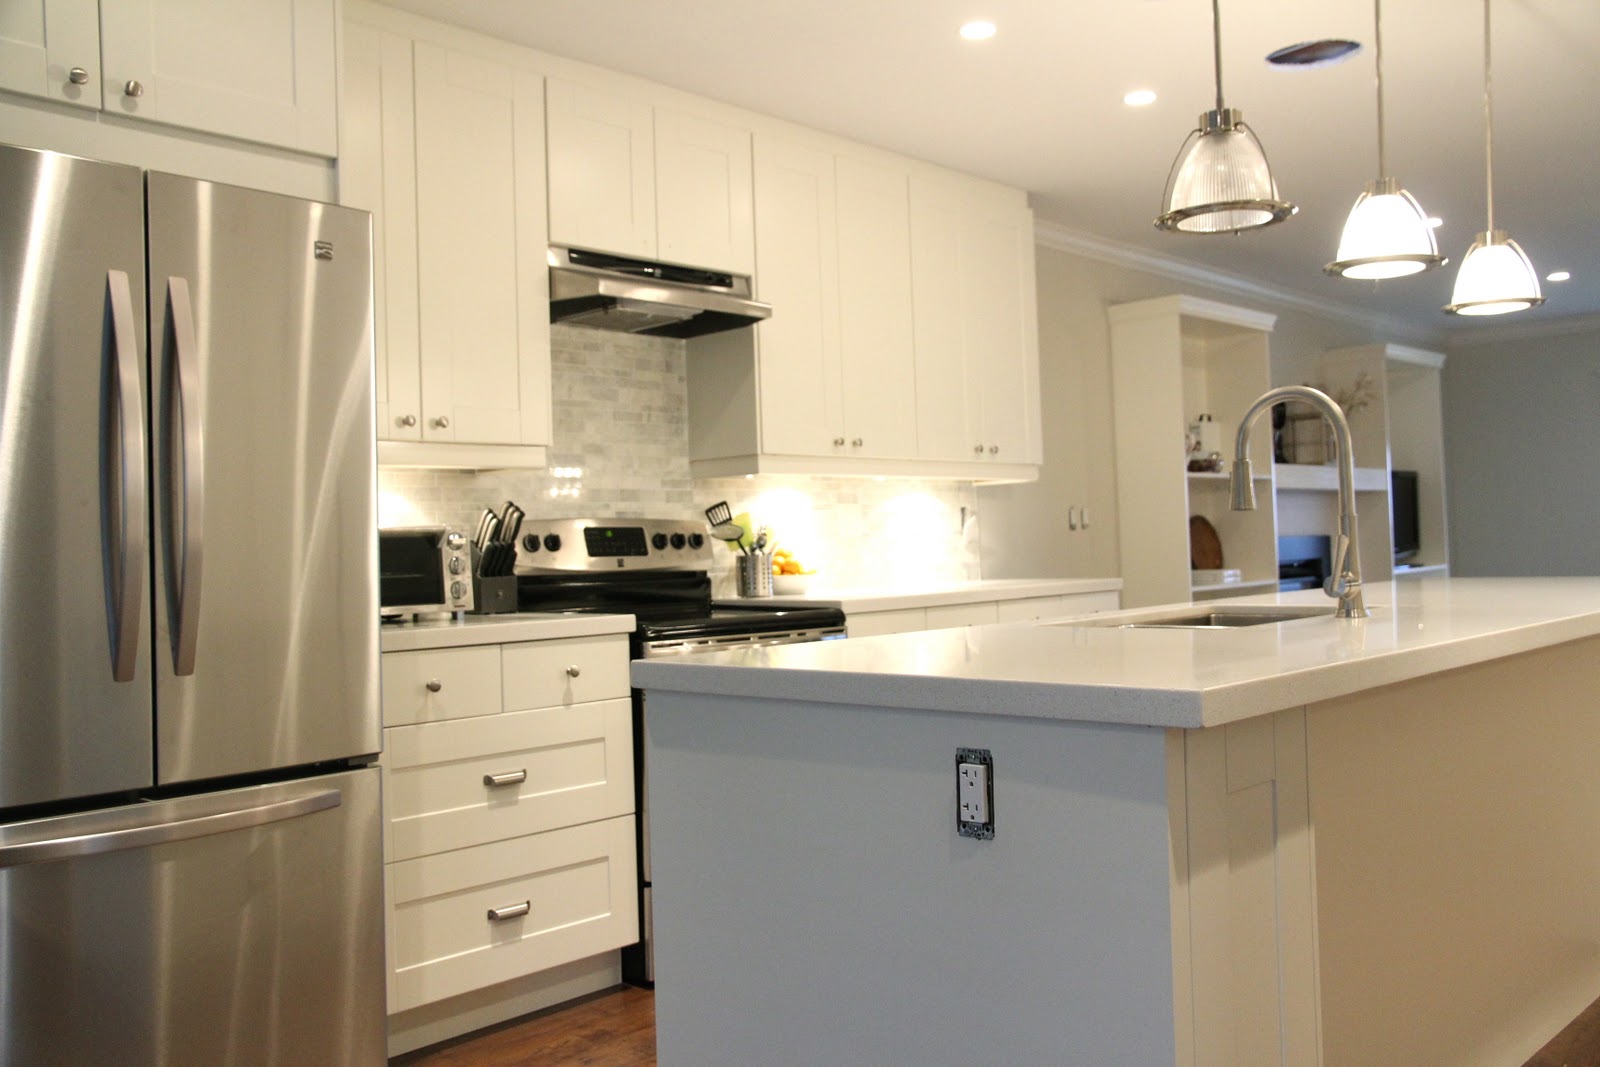 The Benefits Of IKEA Kitchen Cabinets | A Creative Mom